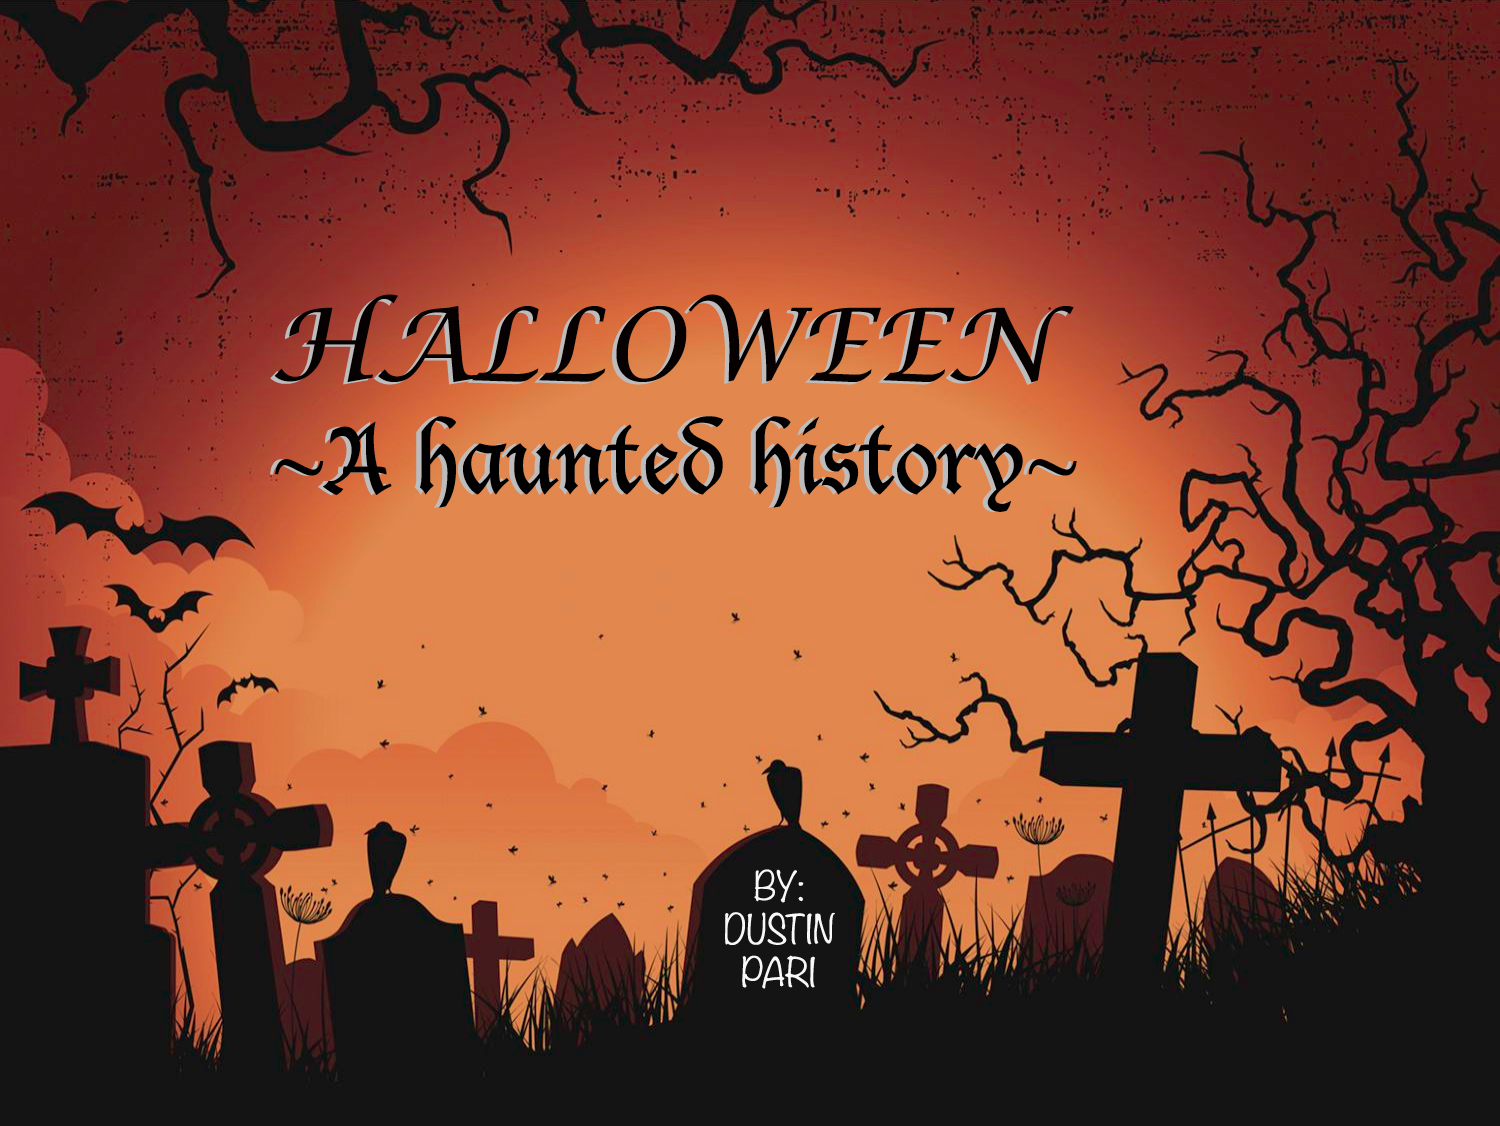 Halloween: A Haunted History Online Event